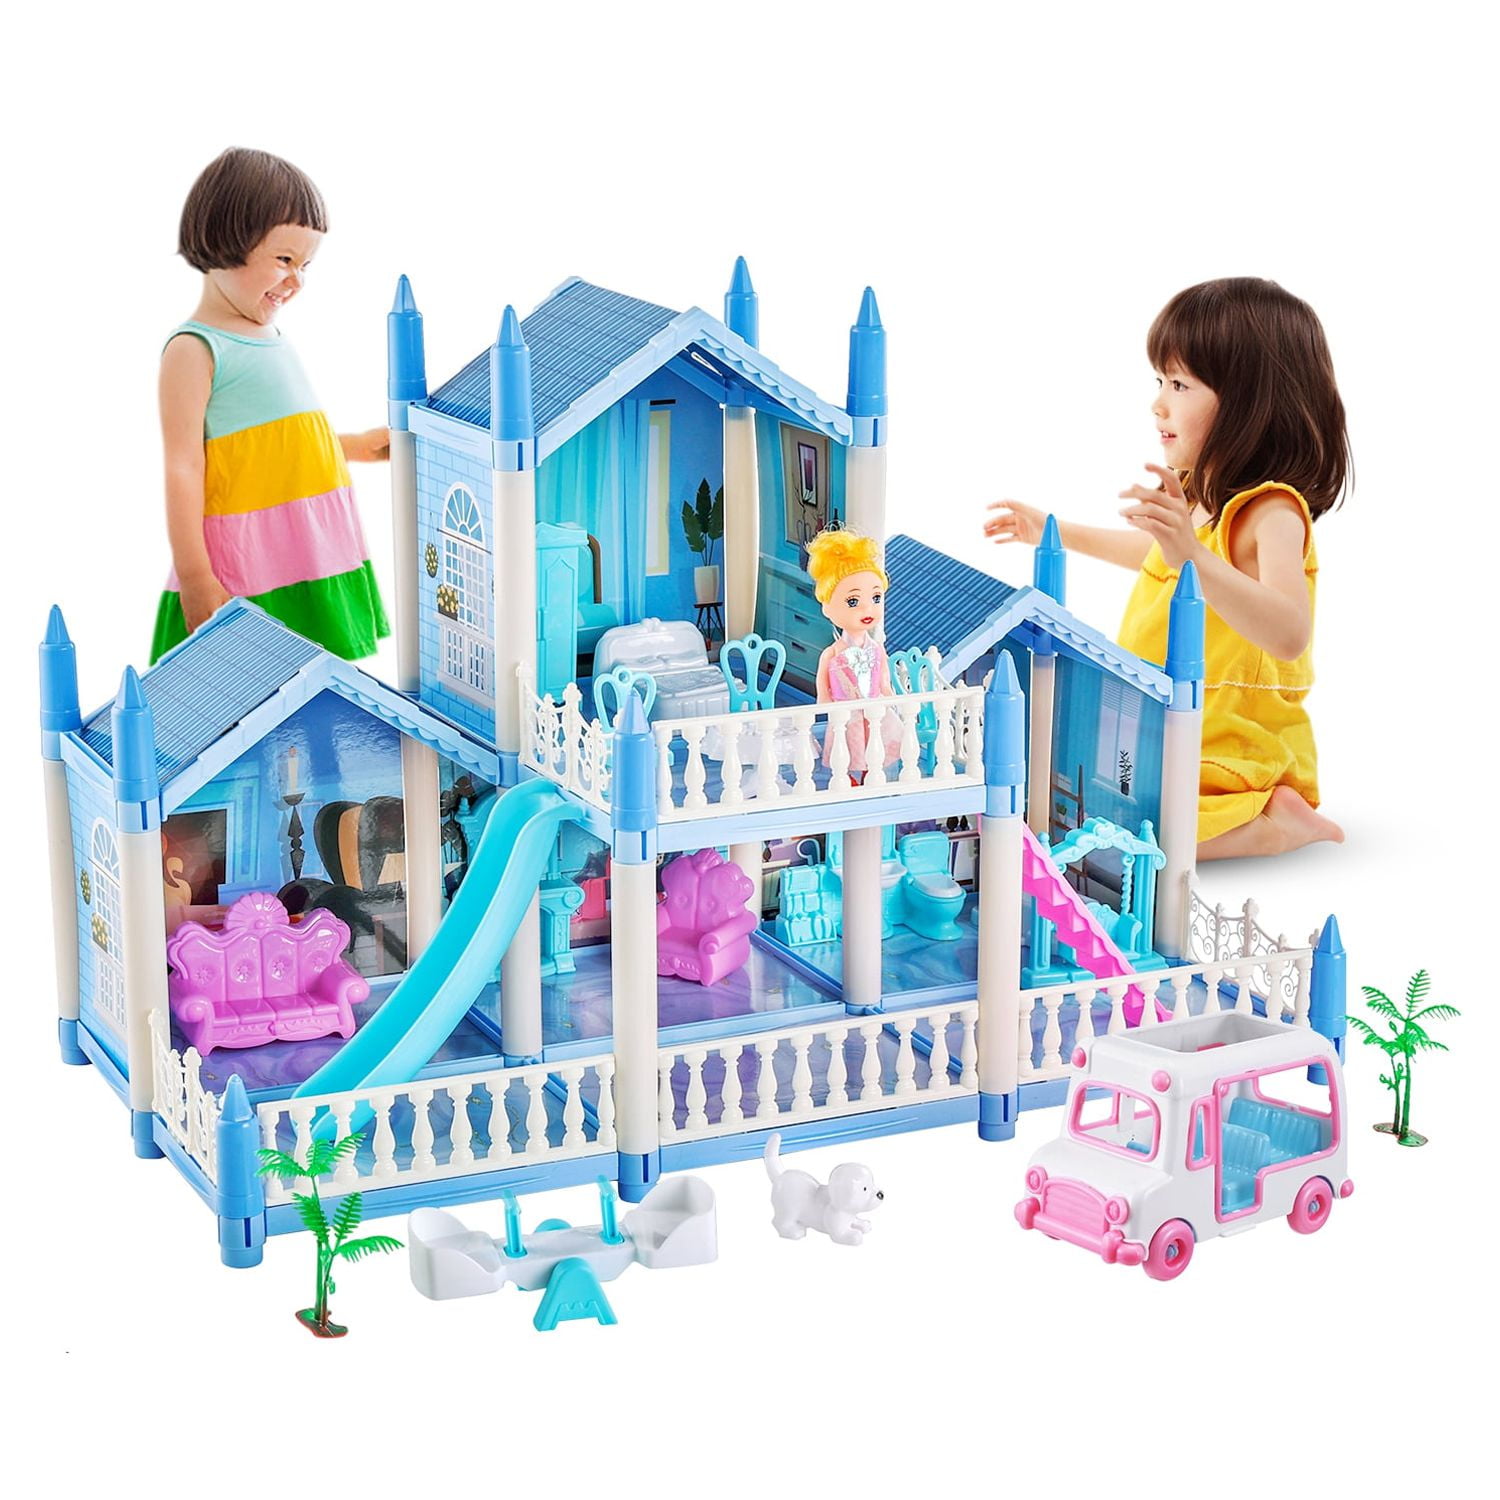 Tiny Land Wooden Dollhouse with 30pcs Furniture | for Girls 3-Level Kids